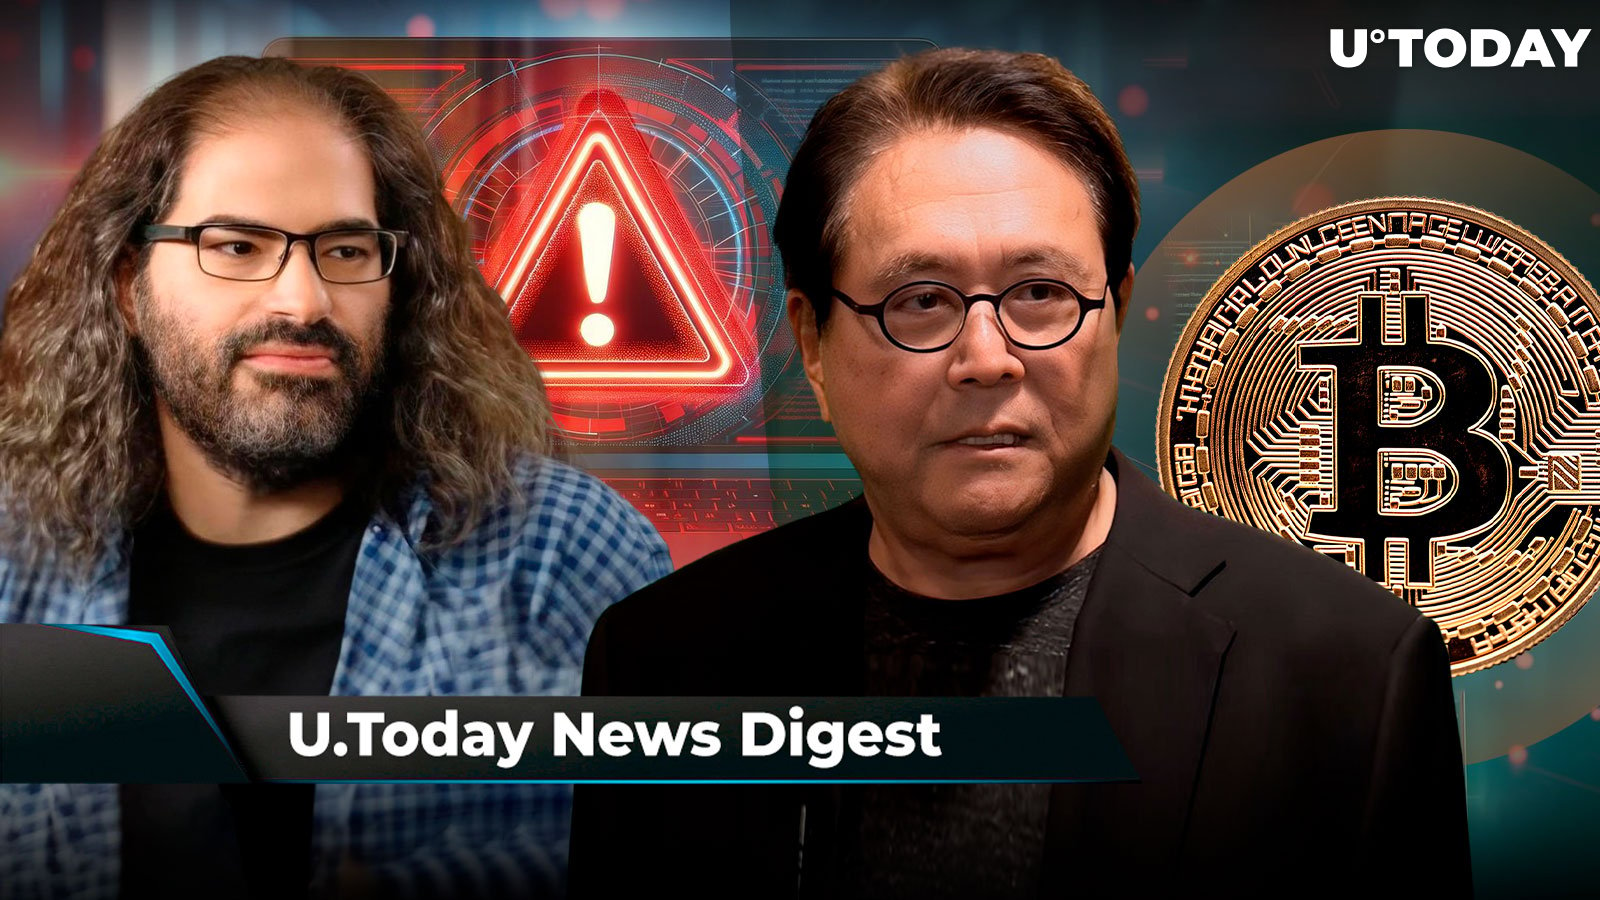 Ripple CTO Issues Important Warning to XRP Army, 'Rich Dad Poor Dad' Author Makes Stunning BTC Price Prediction, SHIB and ADA Explode with Whale Activity: Crypto News Digest by U.Today